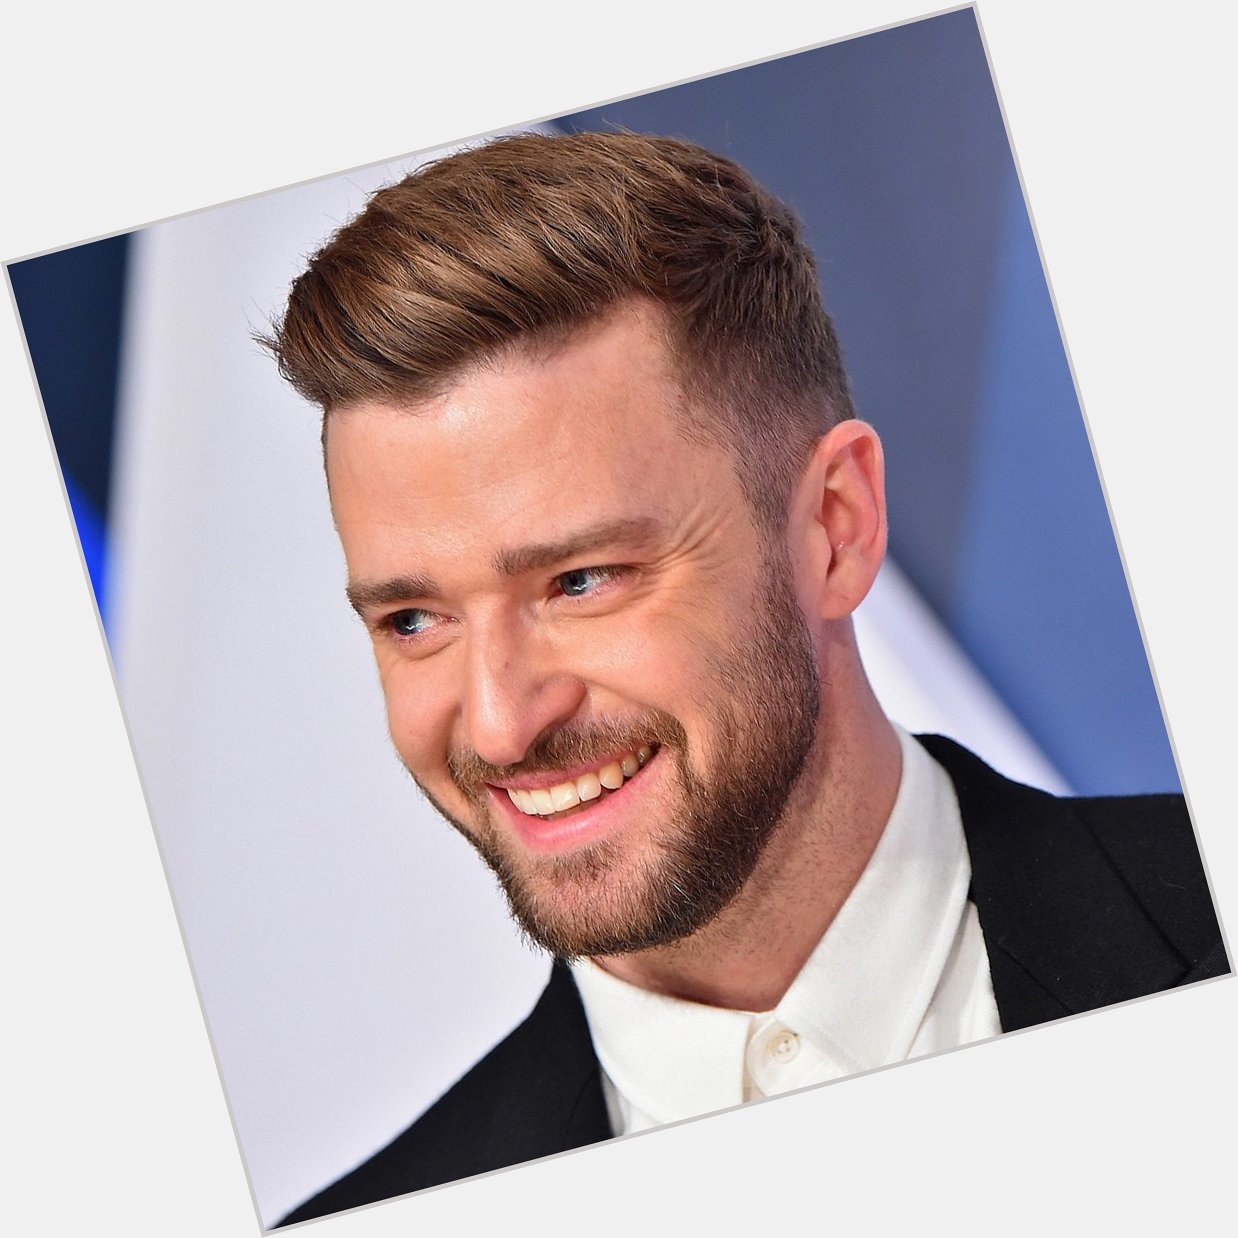 Hands Down Happy Birthday Justin Timberlake I Hope You Have The Gratis Birthday Ever! 